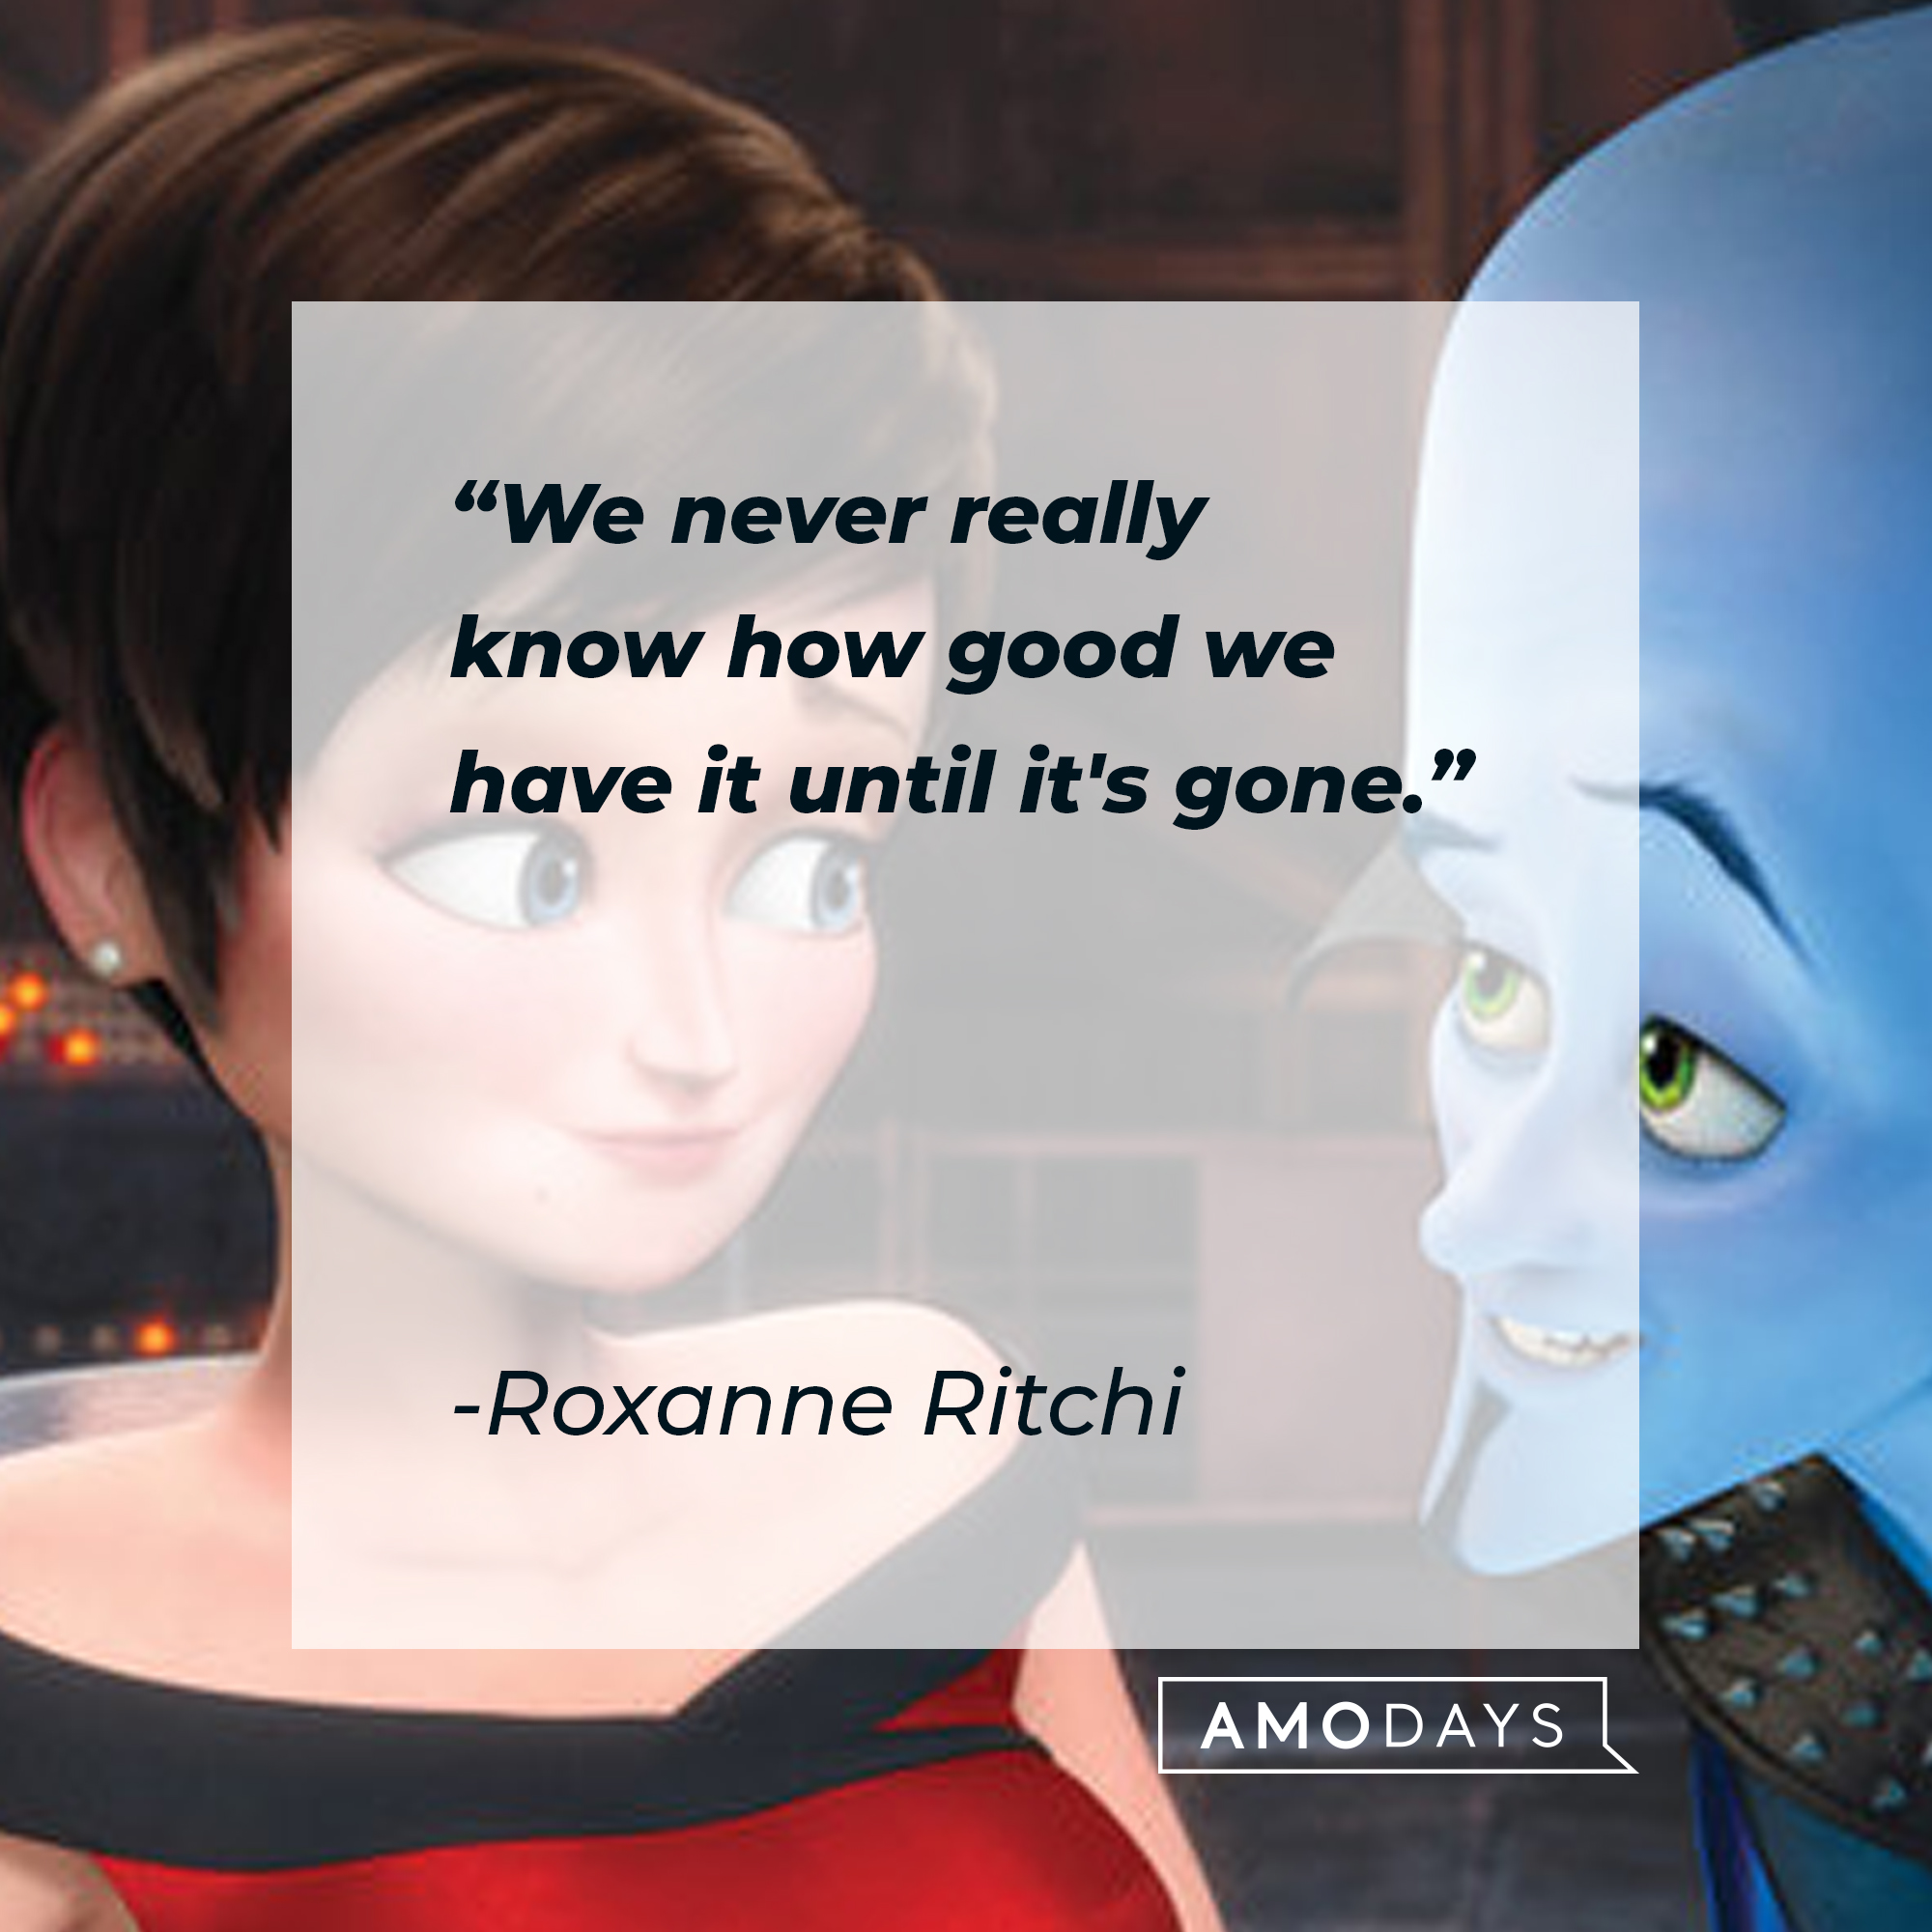 Roxanne Ritchi's quote: "We never really know how good we have it until it's gone." | Source: Facebook.com/MegamindUK